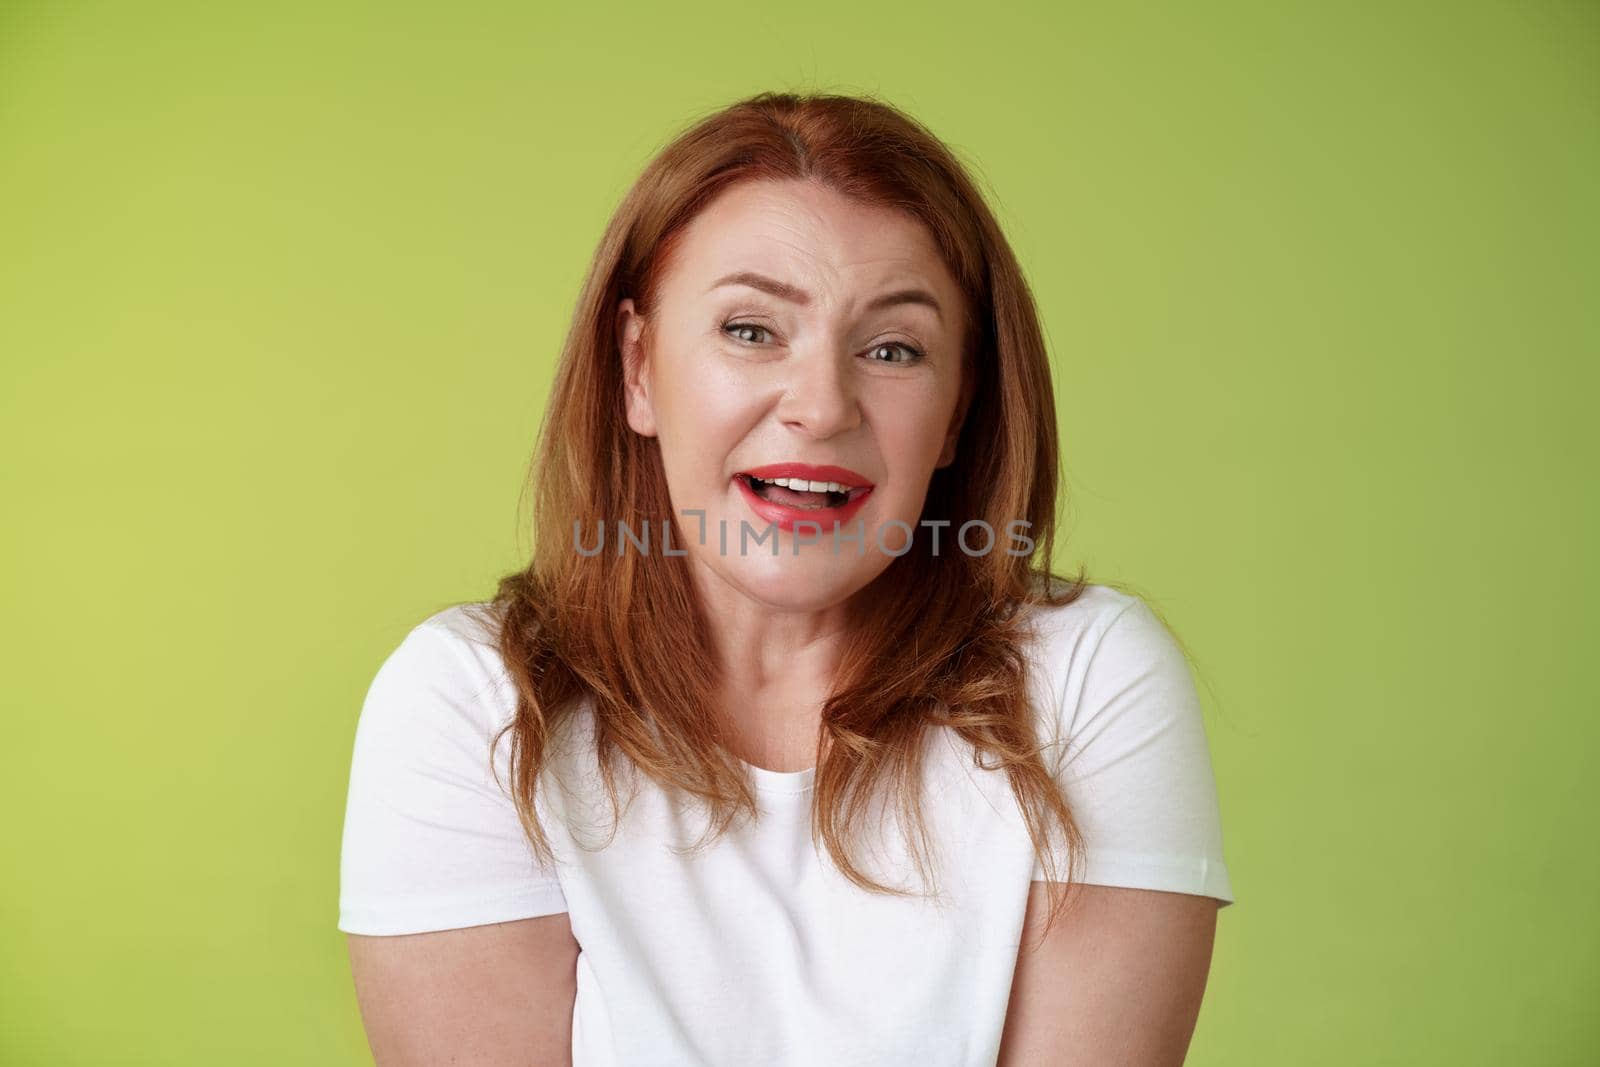 Tender redhead cheerful middle-aged mother sighing happiness temptation smiling delighted look alluring fascinated camera check out cute lovely scene melting heartwarming moment green background.